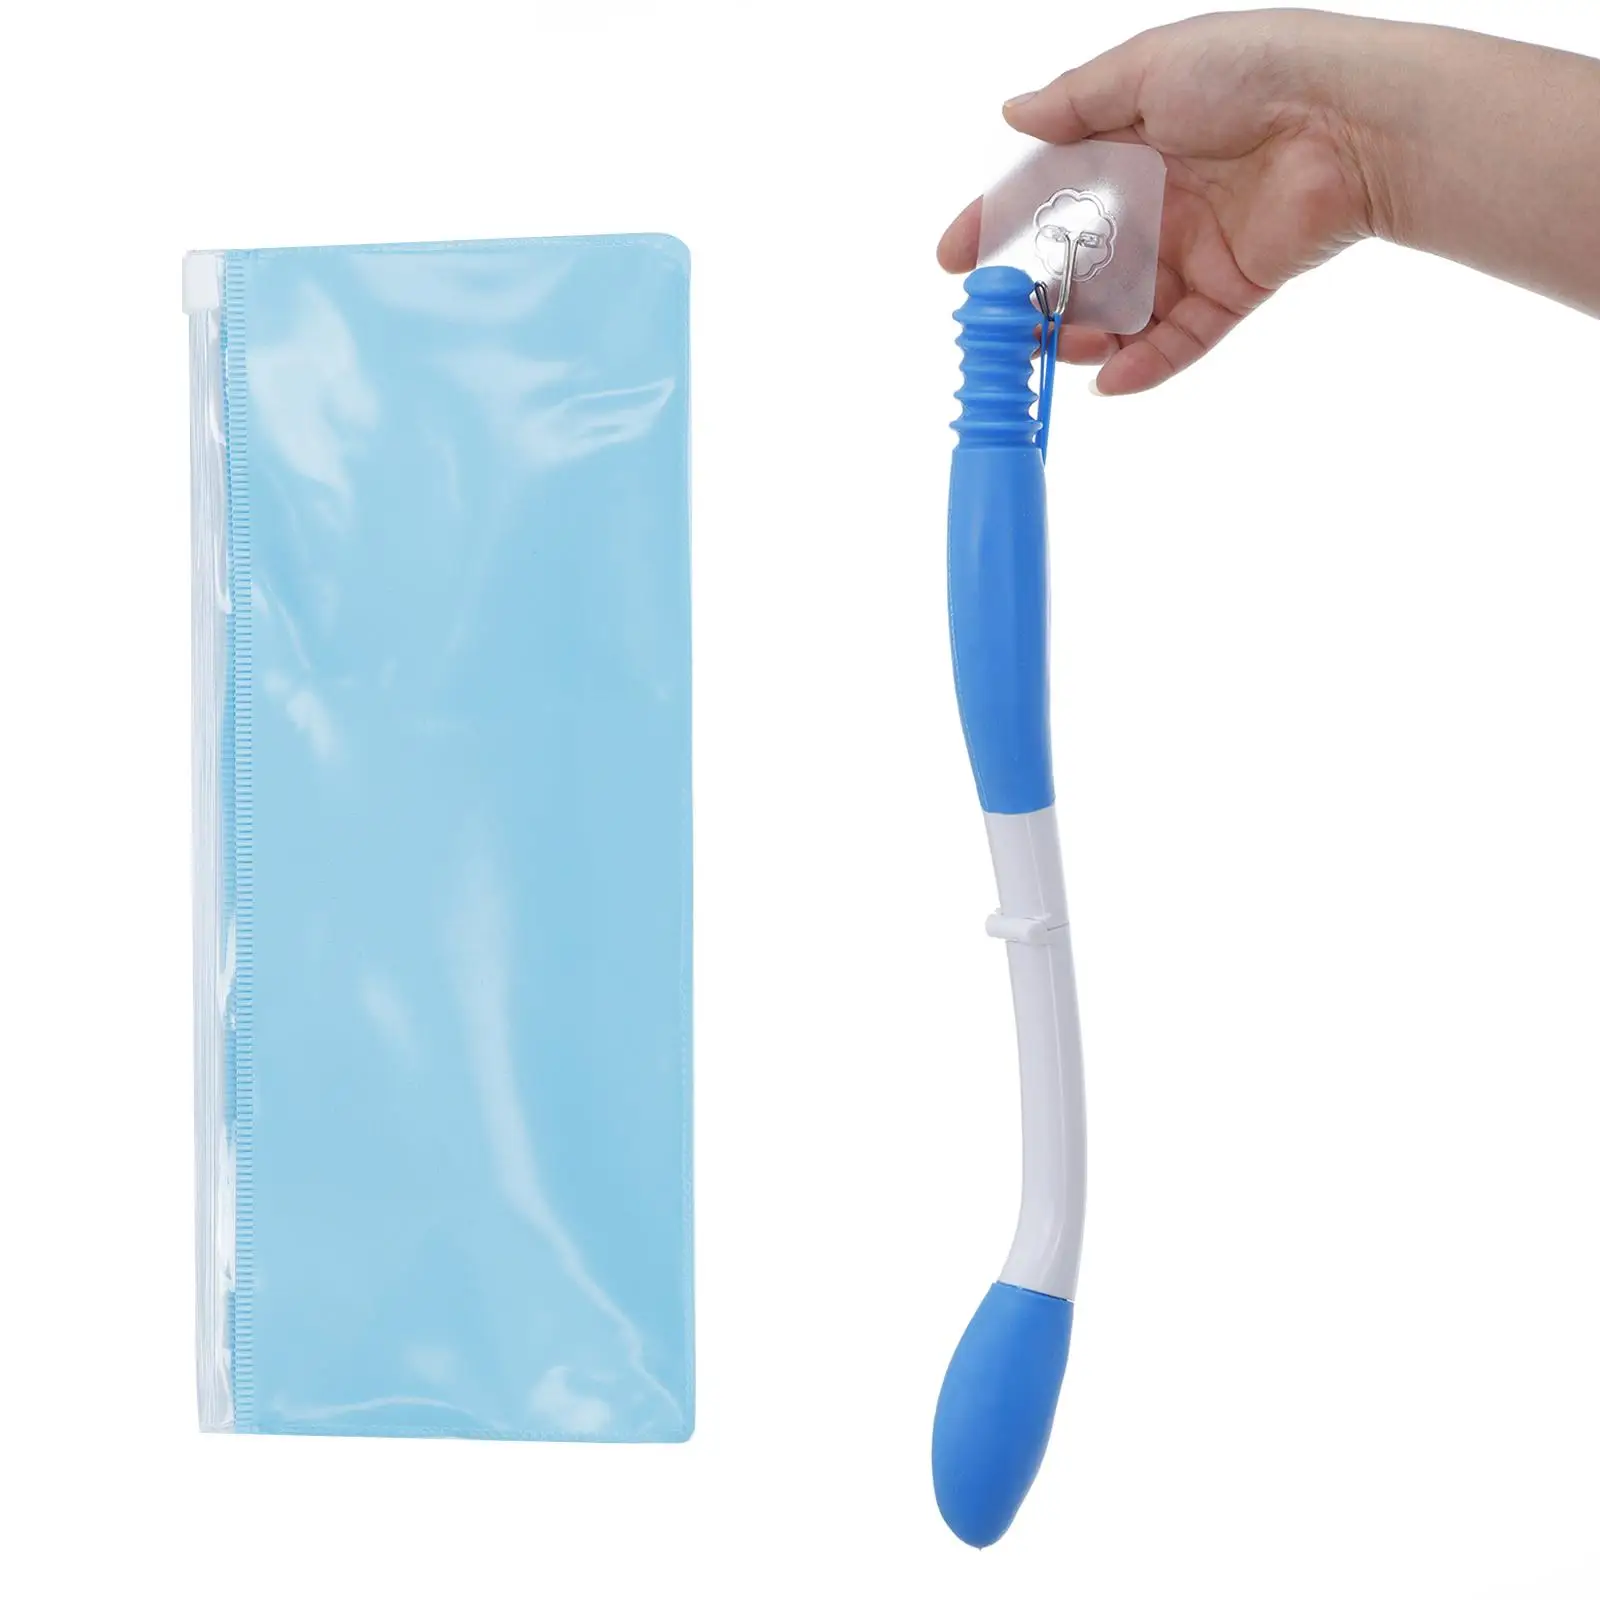 Toilet Aid Wiper Comfort Wipe Wipe Assist for Disabled Daily Living Bathroom